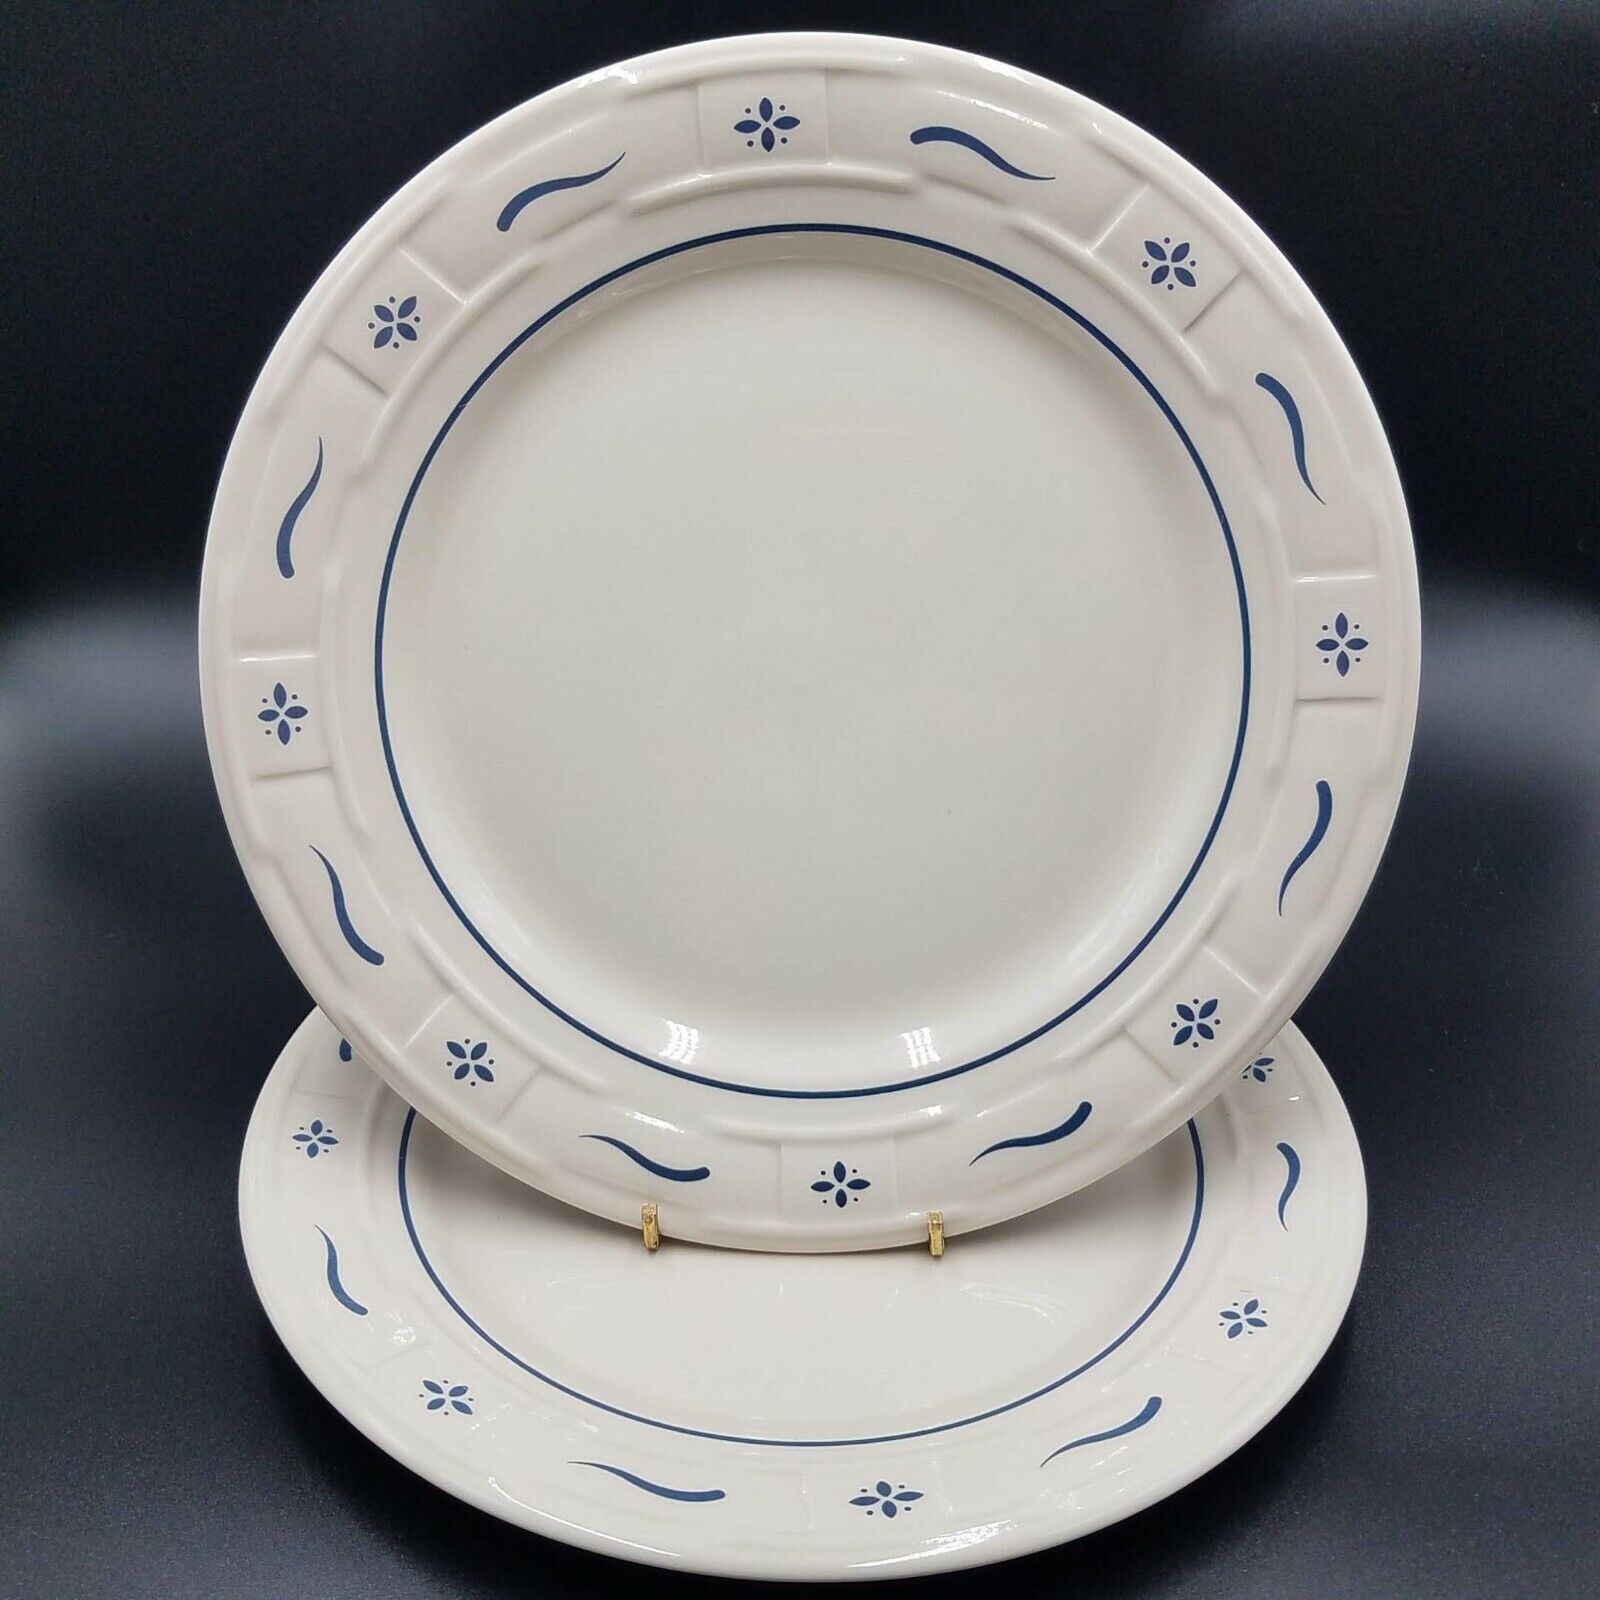 Longaberger Pottery Woven Traditions Classic Blue Dinner Plates (2) E. LIVERPOOL